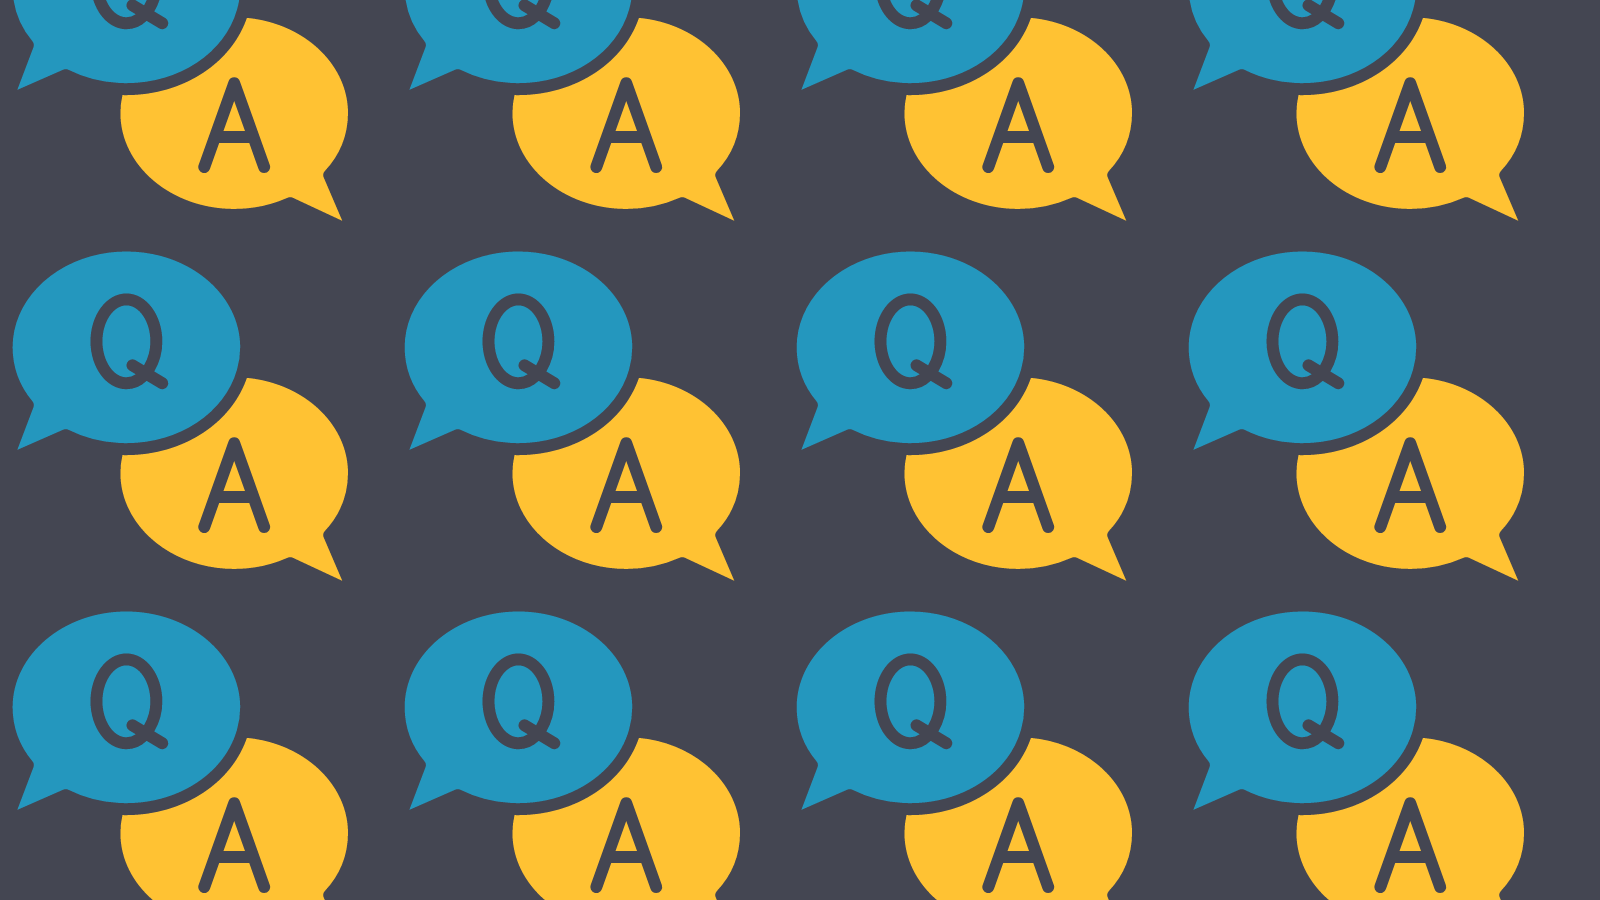 speech bubbles with the letter Q and the letter A in a repeating pattern